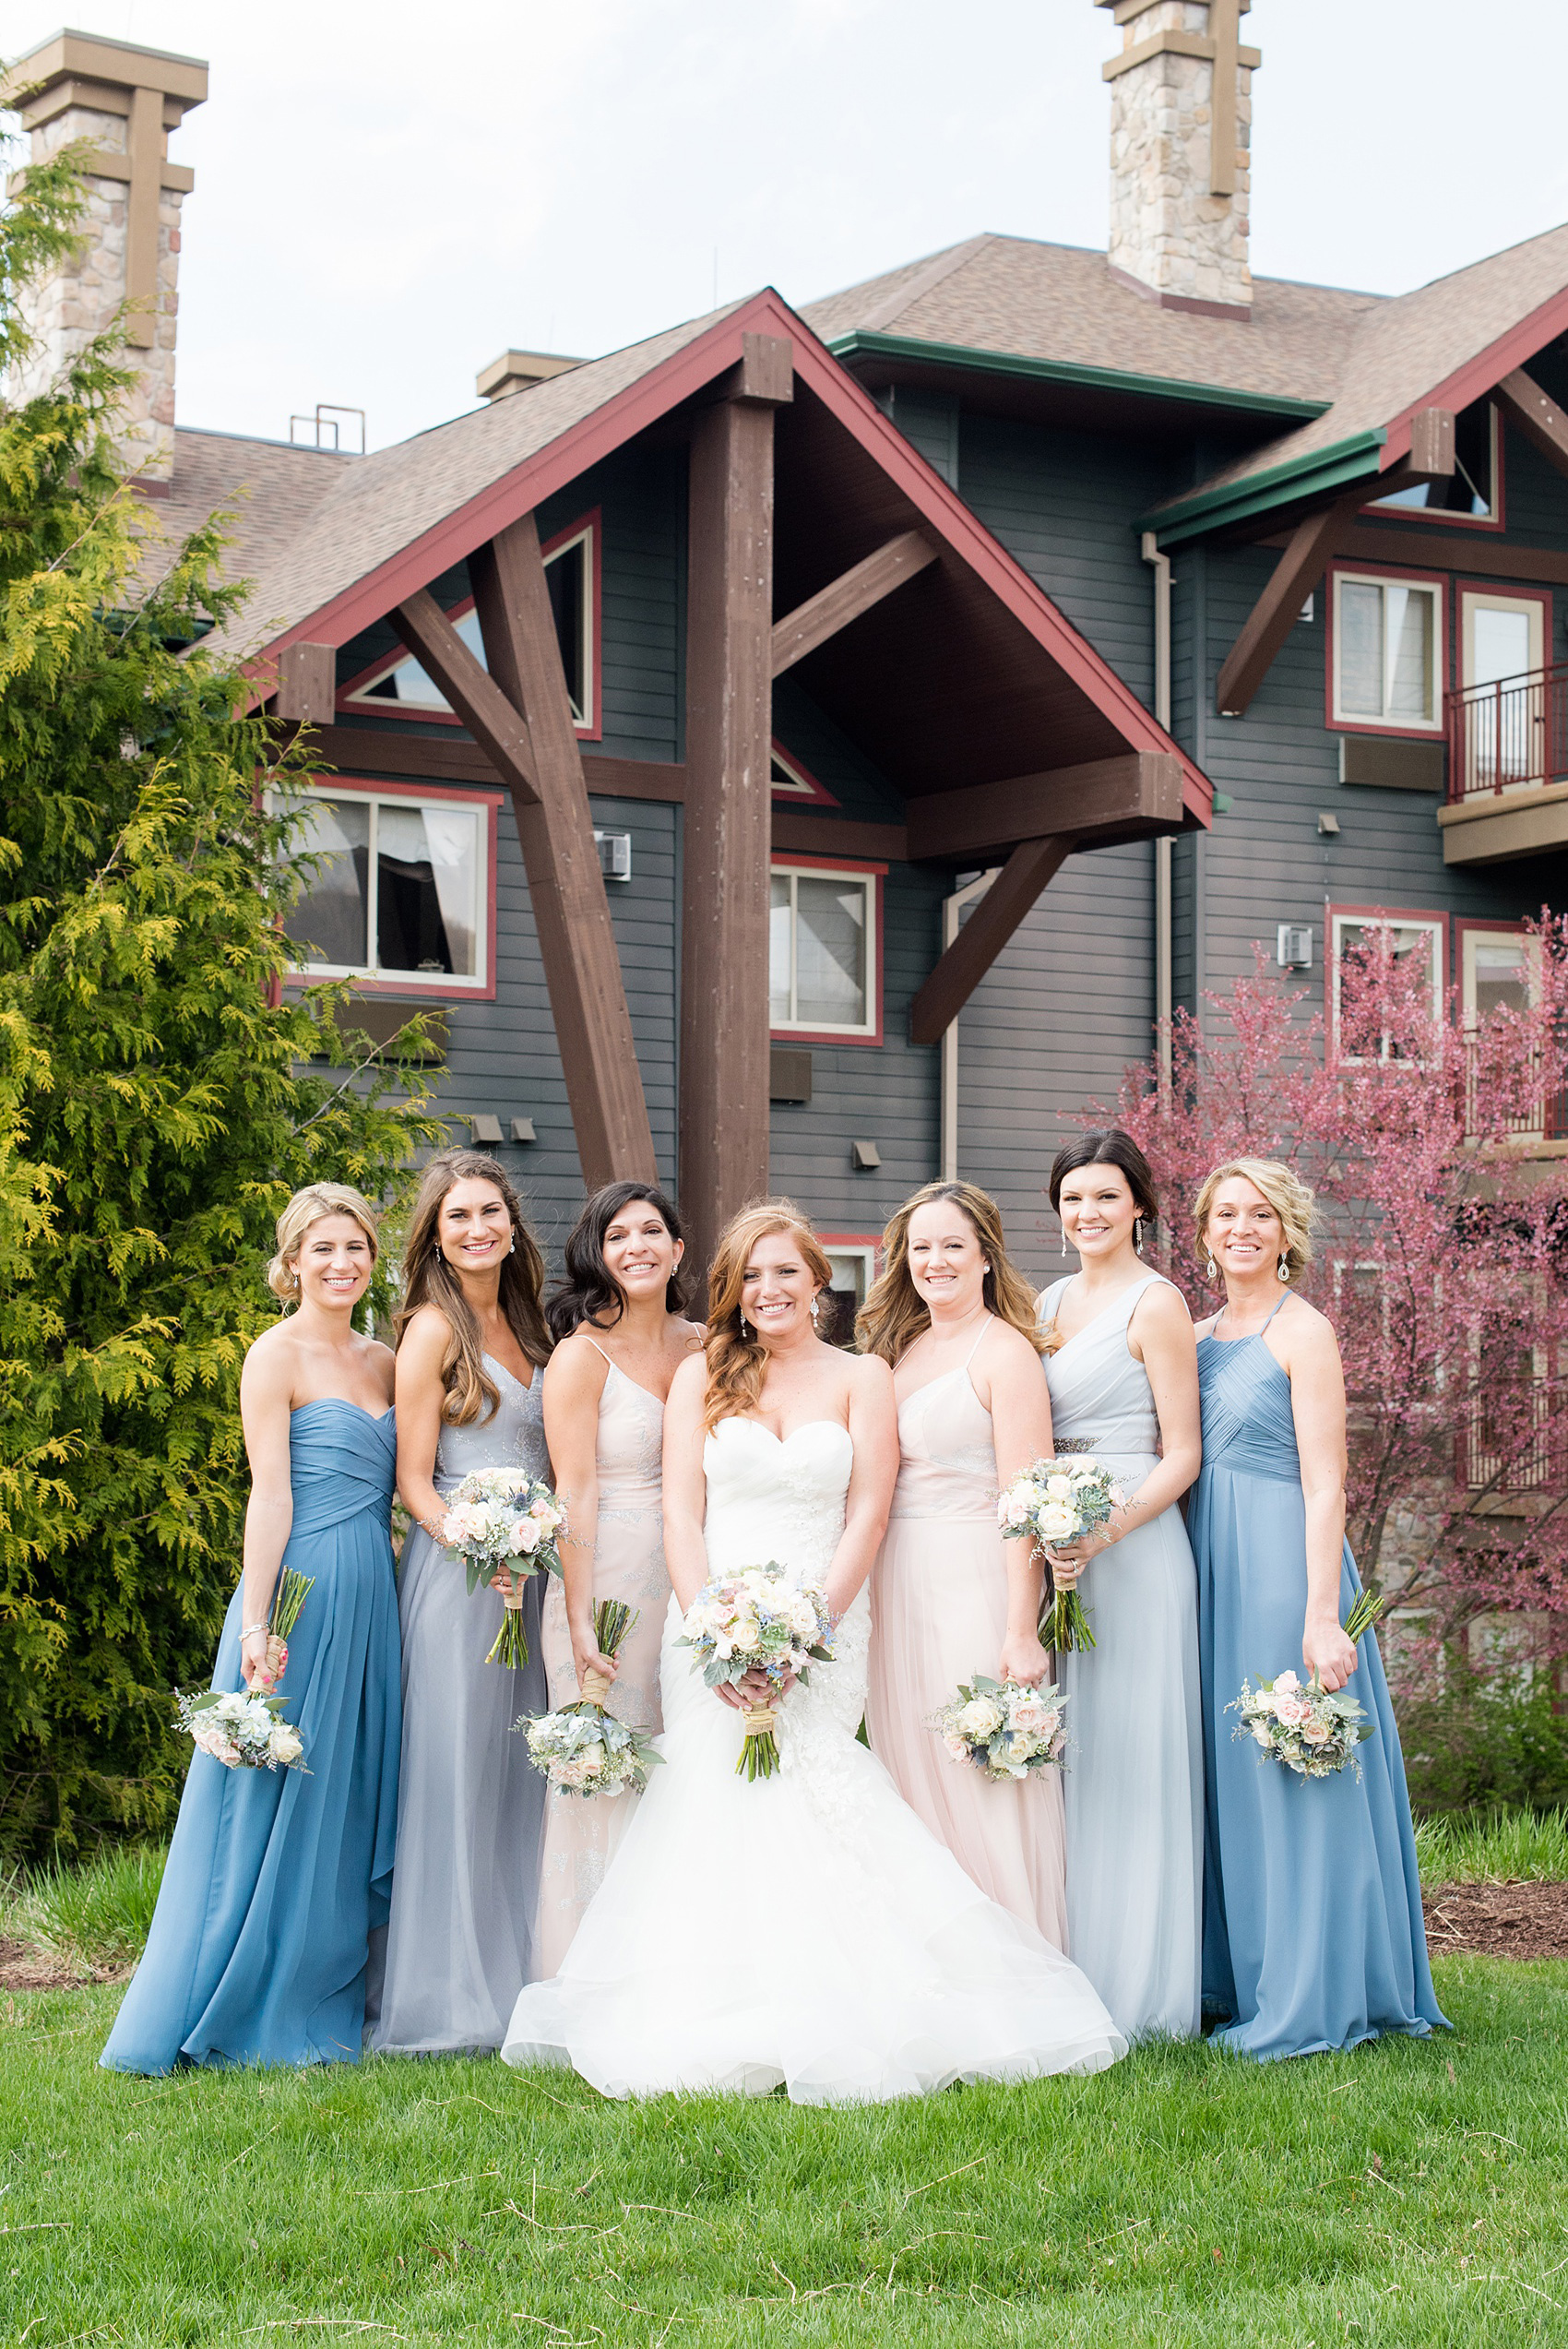 Crystal Springs Resort wedding photos in New Jersey, with photographer Mikkel Paige Photography. The couple’s spring wedding had an outdoor ceremony with photos at this rustic, woodsy venue showing their blue and pink palette decor from getting ready to their reception. This picture shows the bridal party (bridesmaids) in their mismatched blue and pink gowns. Click through to see their complete wedding recap! #NewJerseywedding #MikkelPaige #NJweddingphotographer #NJphotographer #brideandgroom #springwedding #mismatchedgowns #pinkandblue #weddingparty #bridalparty